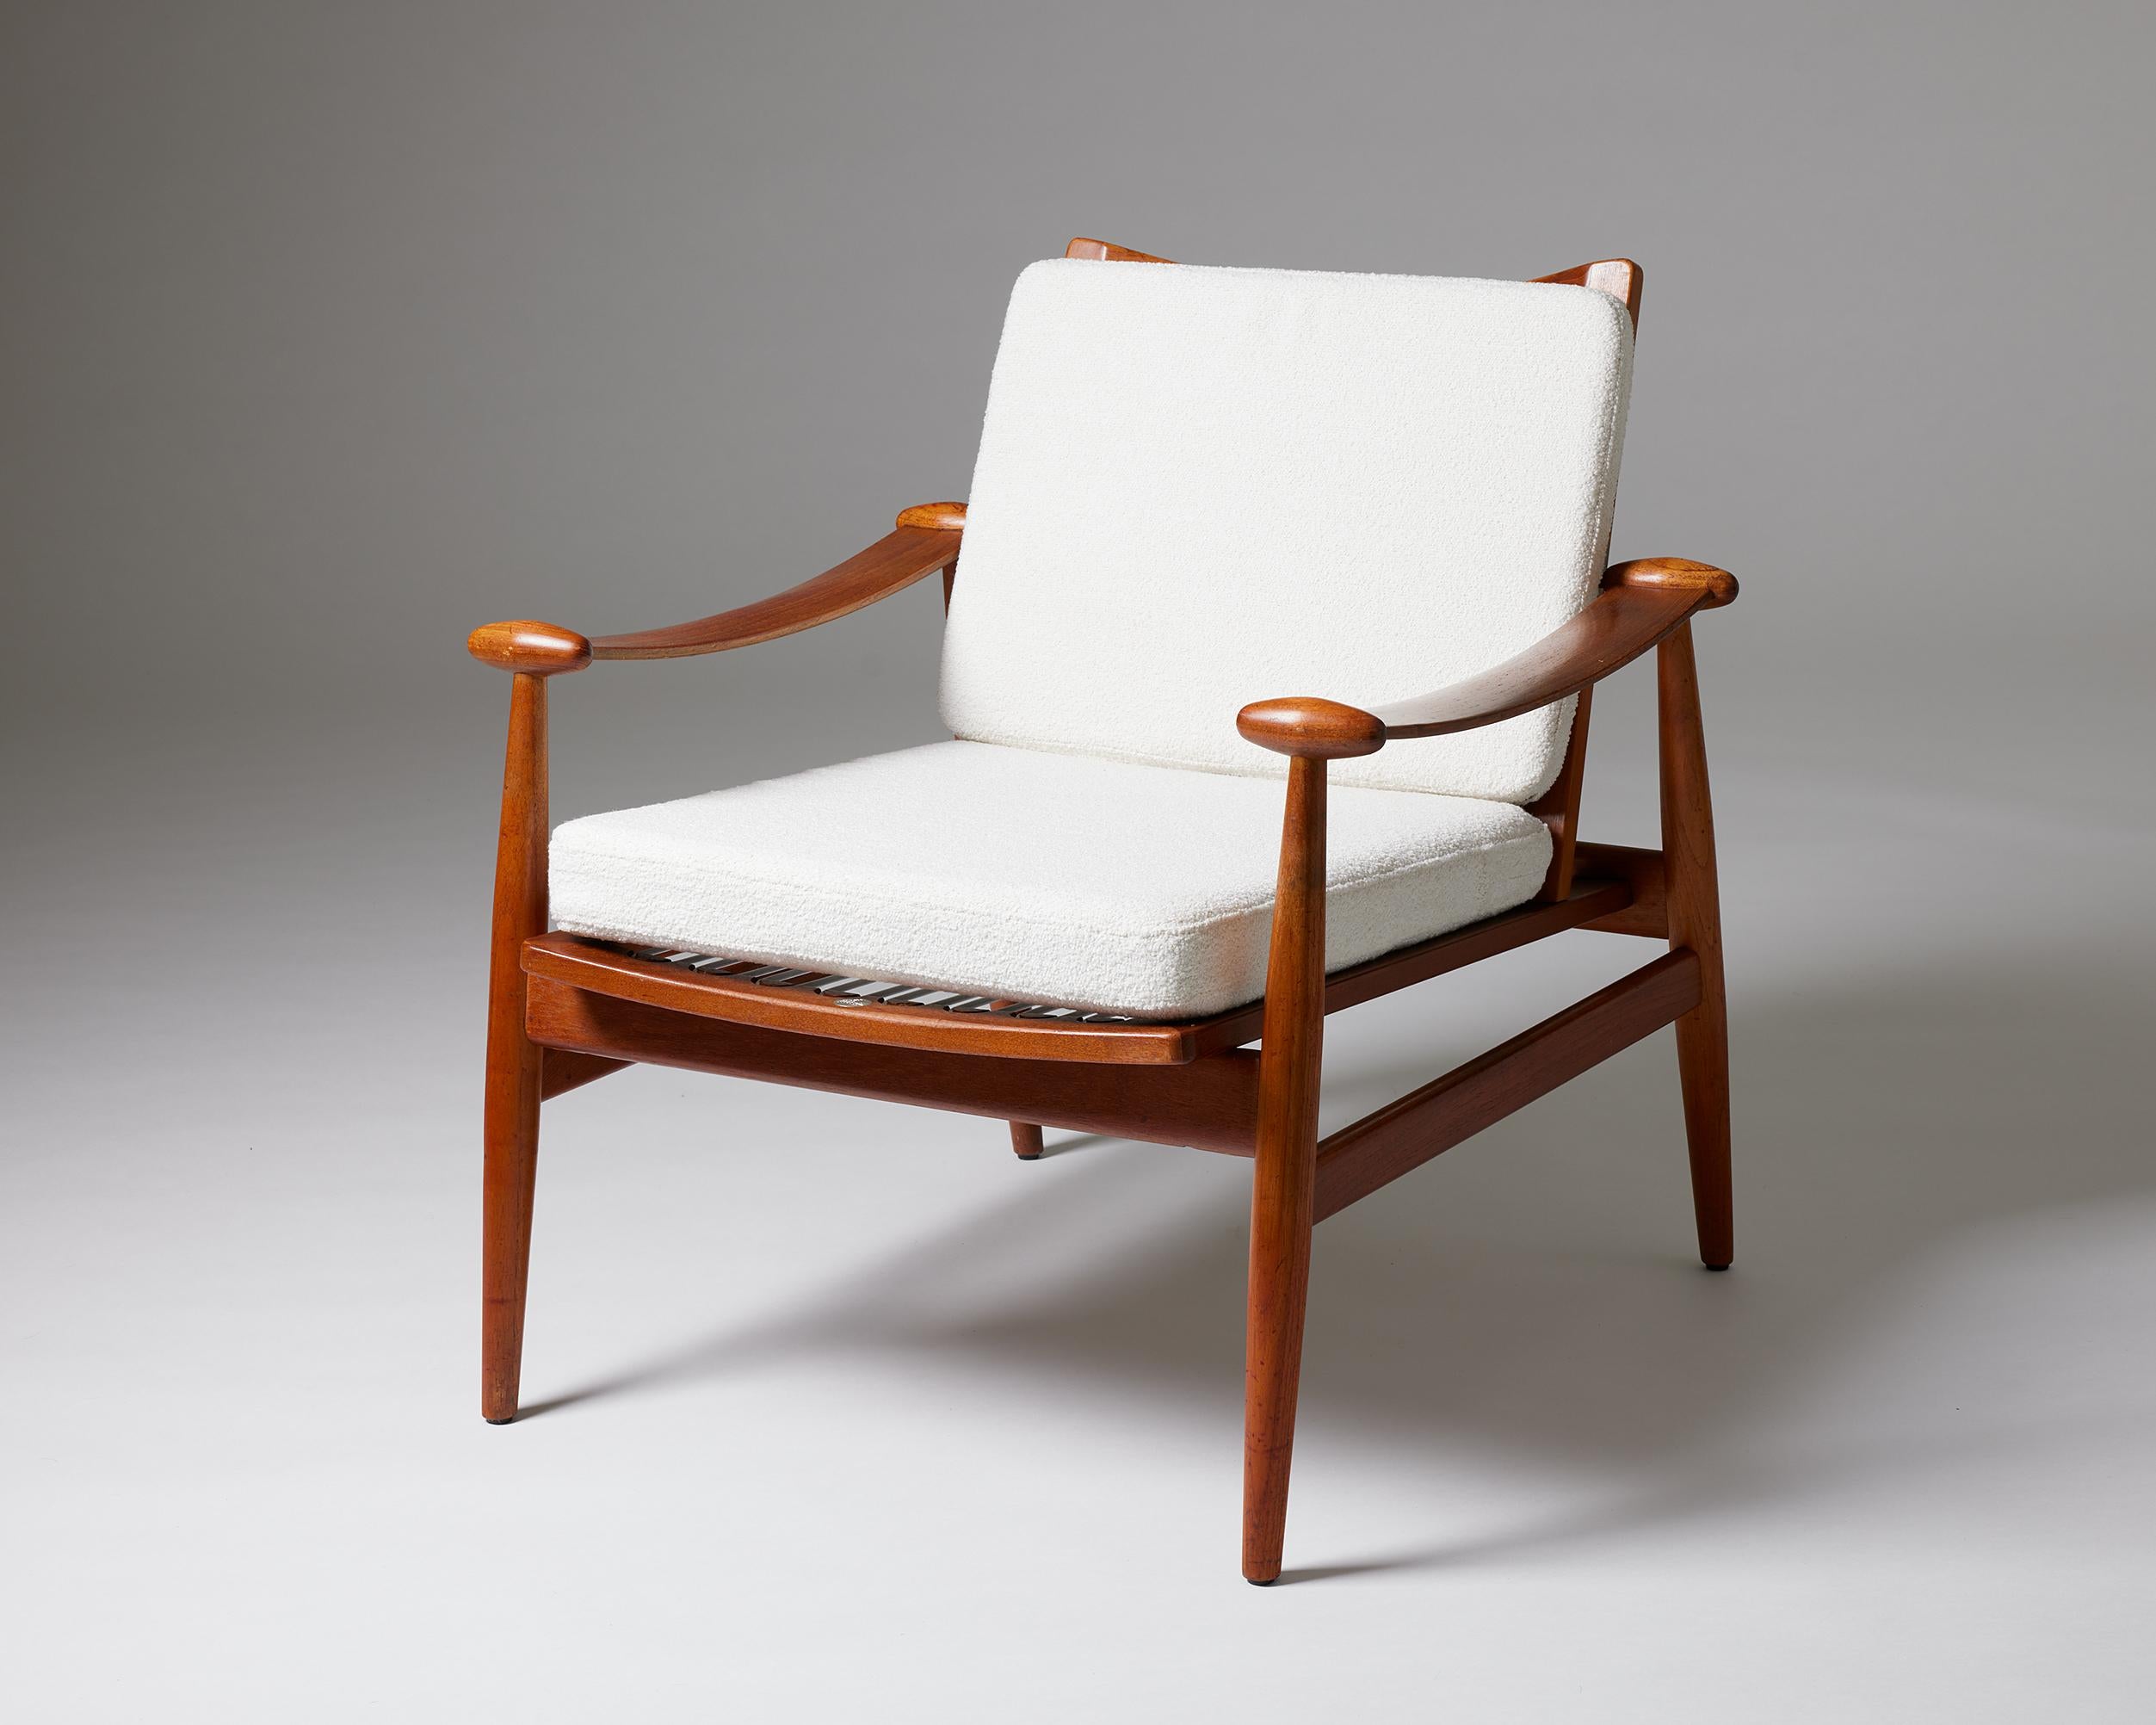 Chair ‘Spade’ model FD 133 designed by Finn Juhl for Frankrike & Søn,
Denmark, 1954.

Teak and fabric.

Marked.

Juhl initially wanted to be an art historian, but his father doubted the financial prospects of the profession. The compromise was that